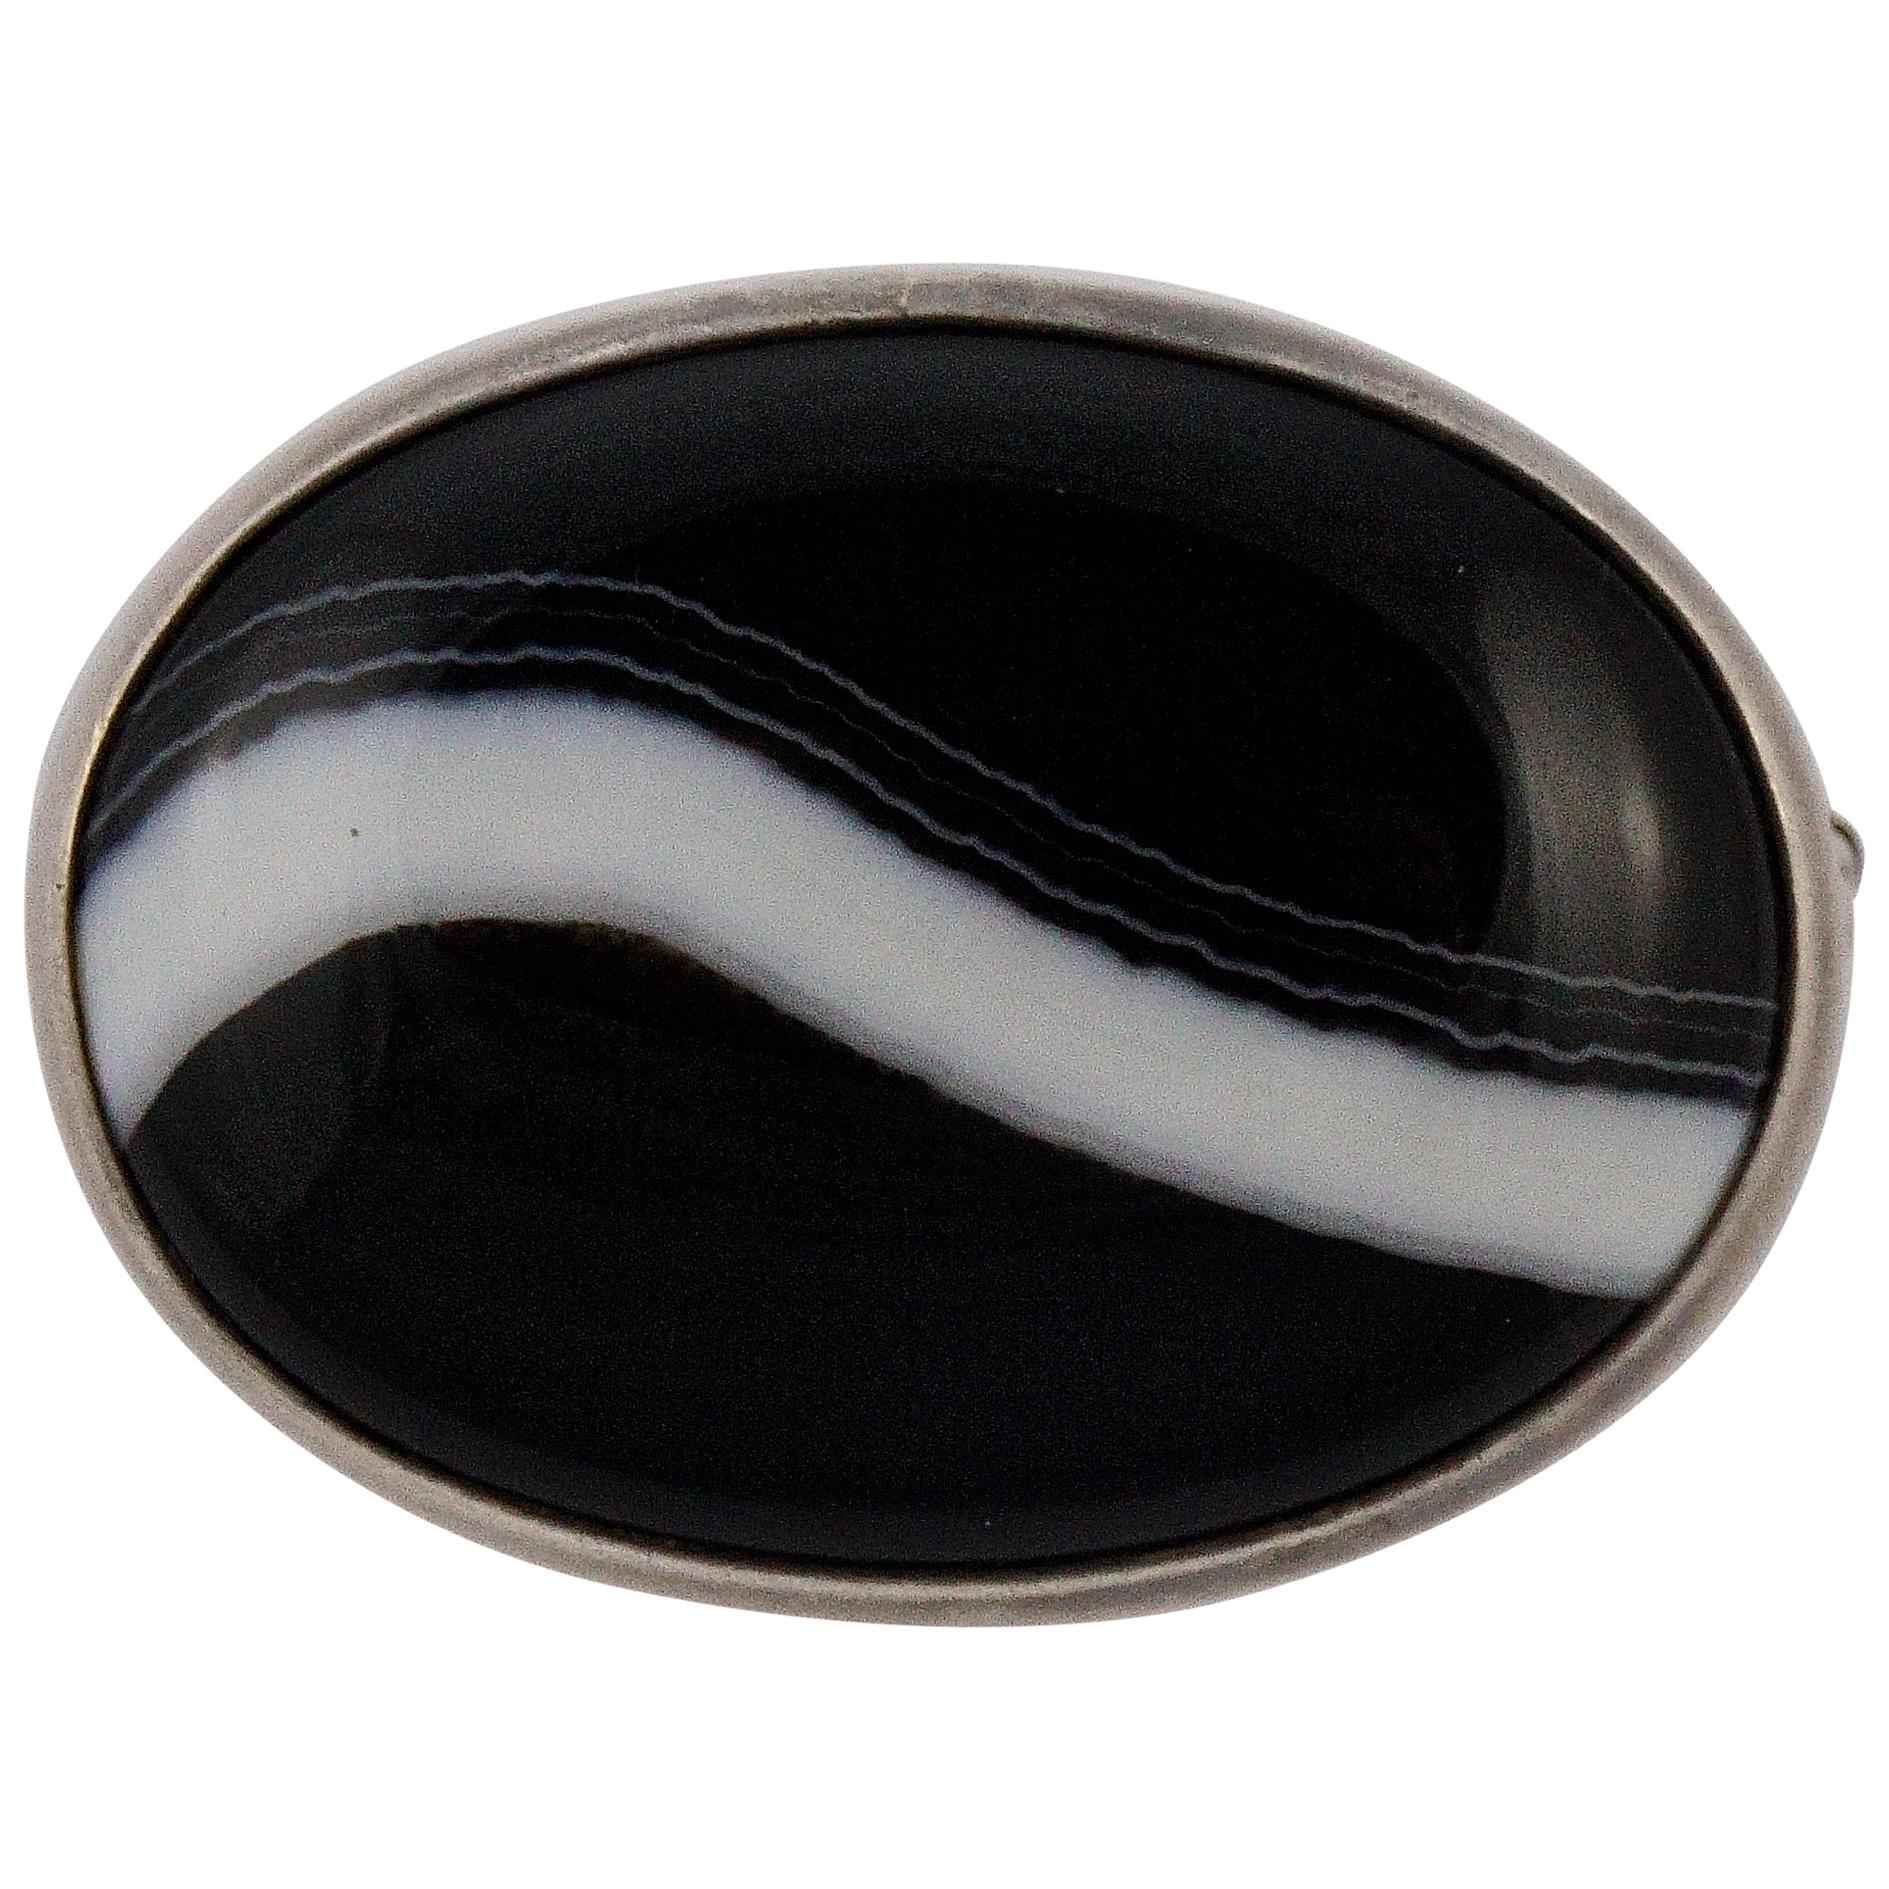 antique banded agate silver brooch